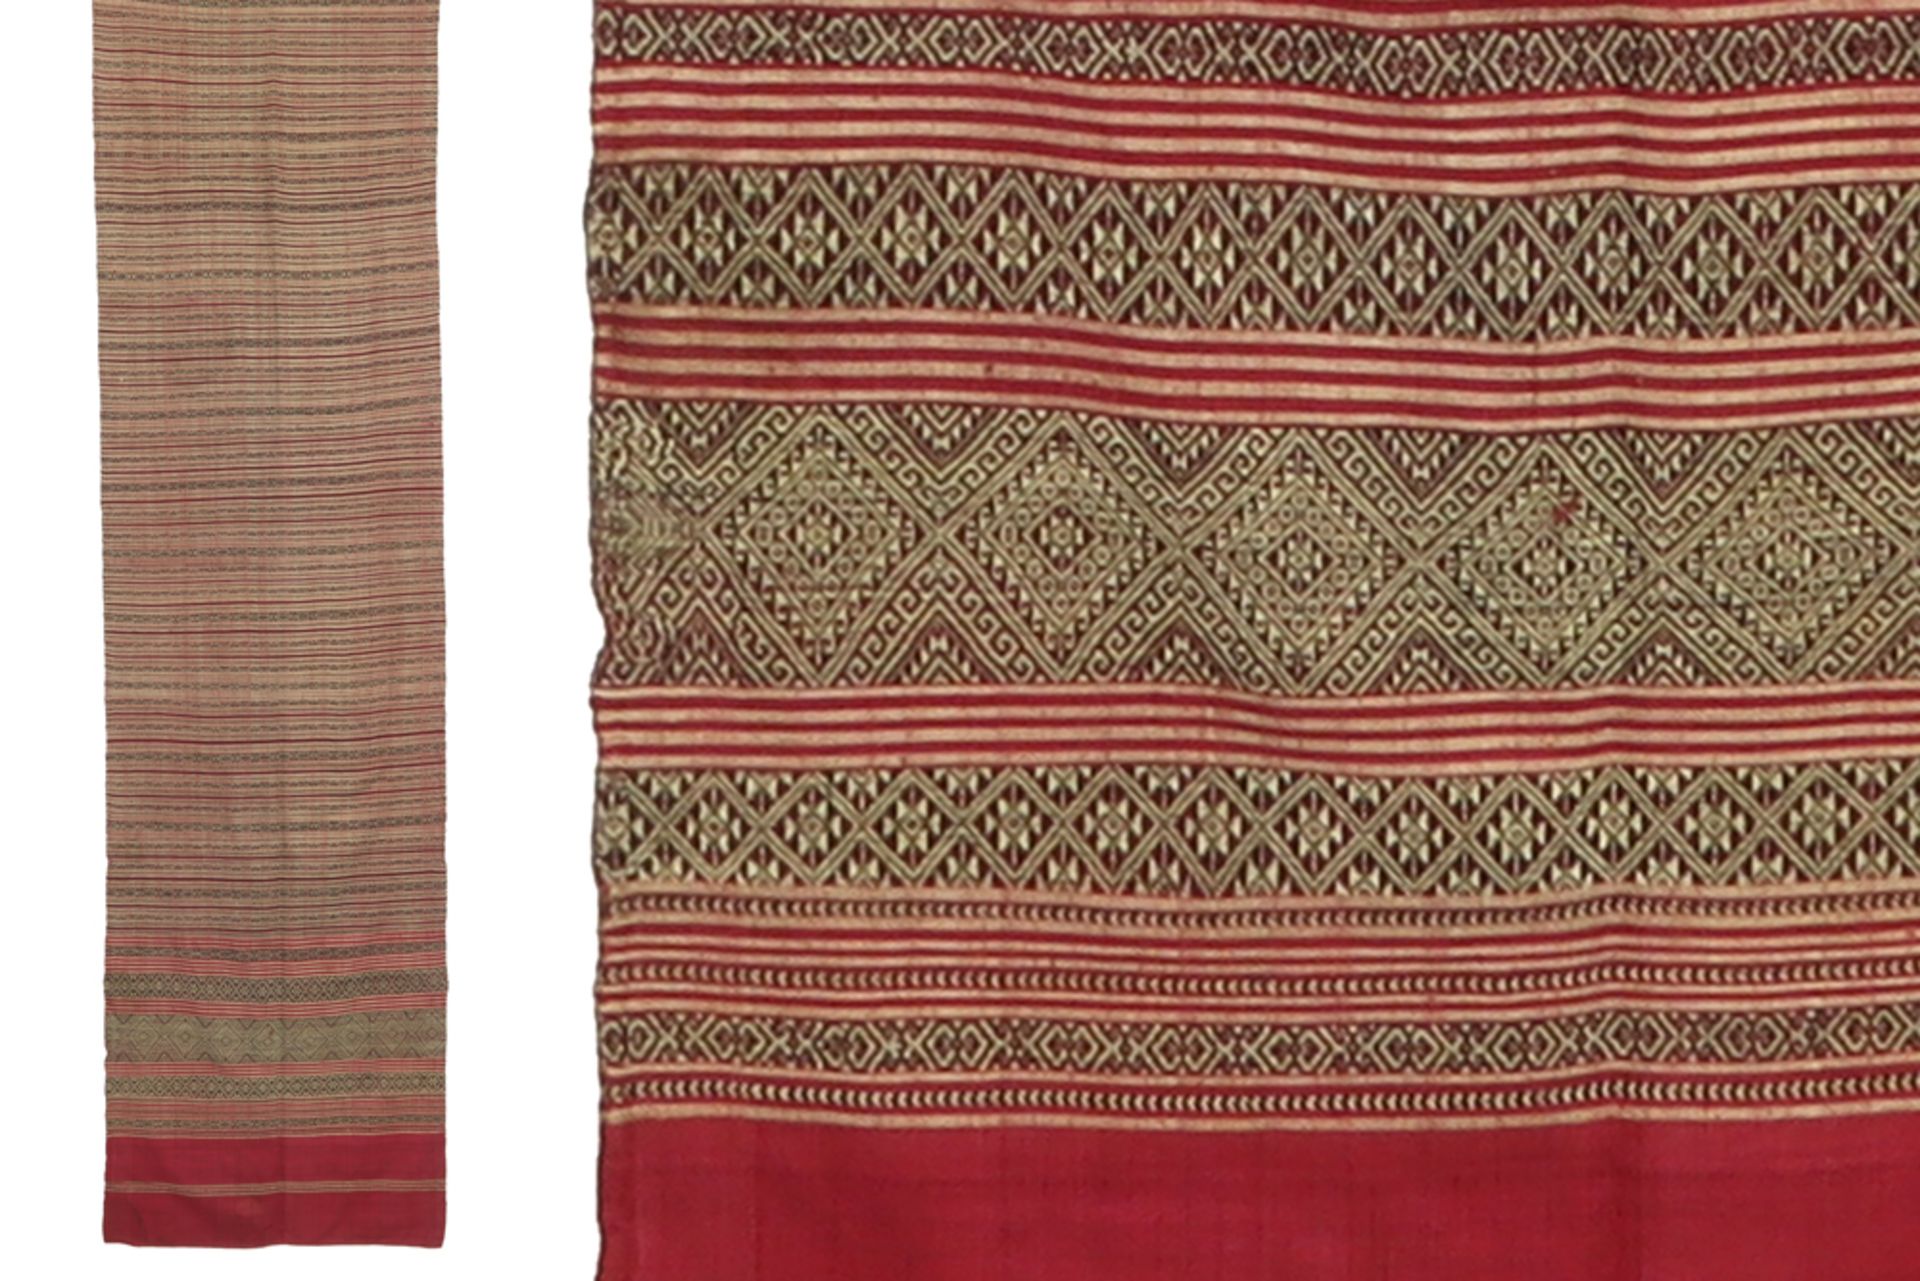 'antique' ethnic shoulder shawl from the Kalasin people (eastern Thailand) in hand-woven silk with